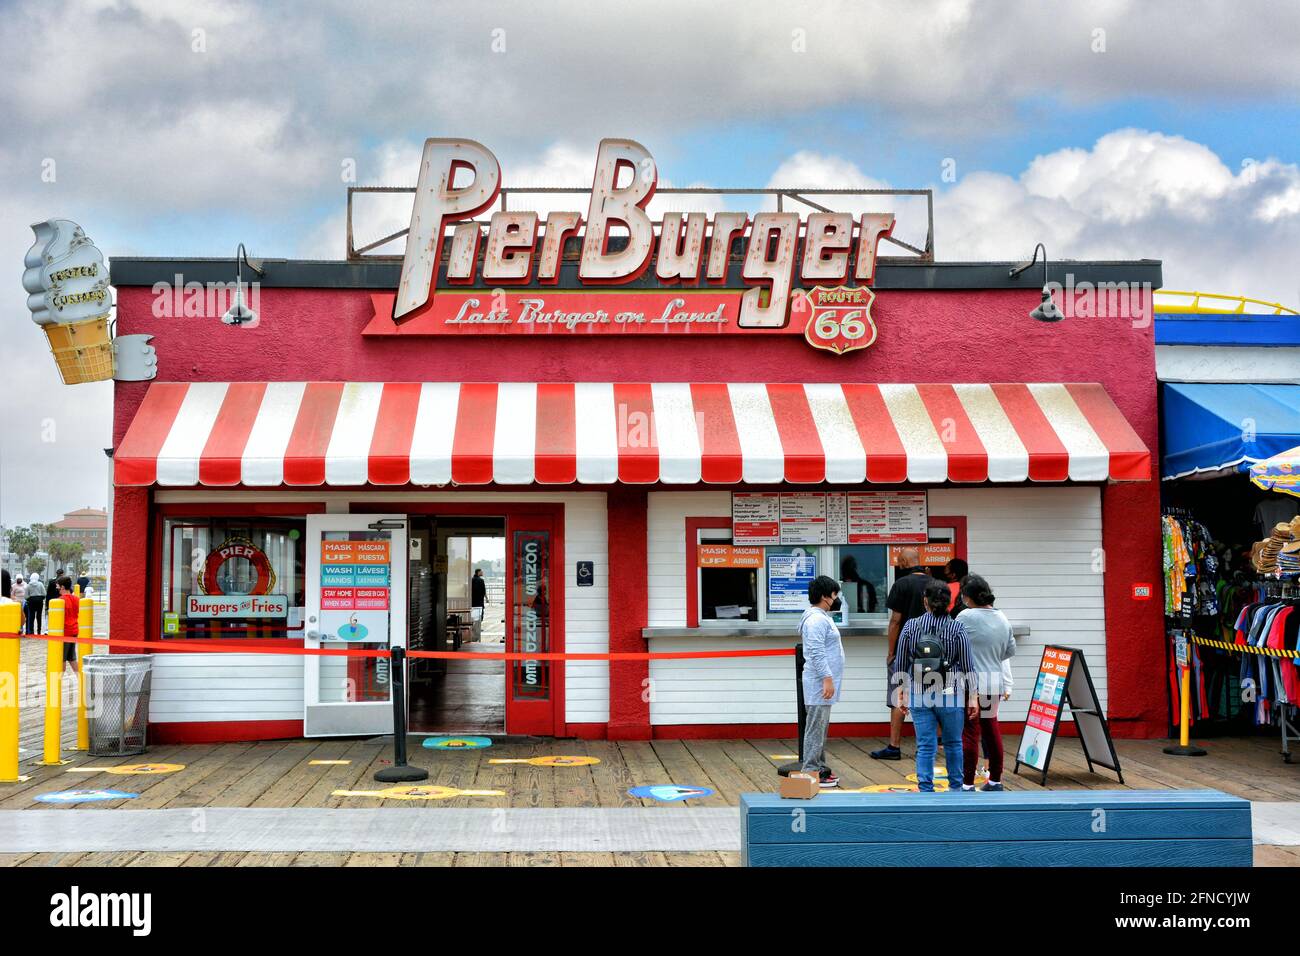 SANTA MONICA, CALIFORNIA - 15 MAY 2021: Pier Burger is a counter-serve food stand on the pier known for burgers, fries, custard and concretes. Stock Photo